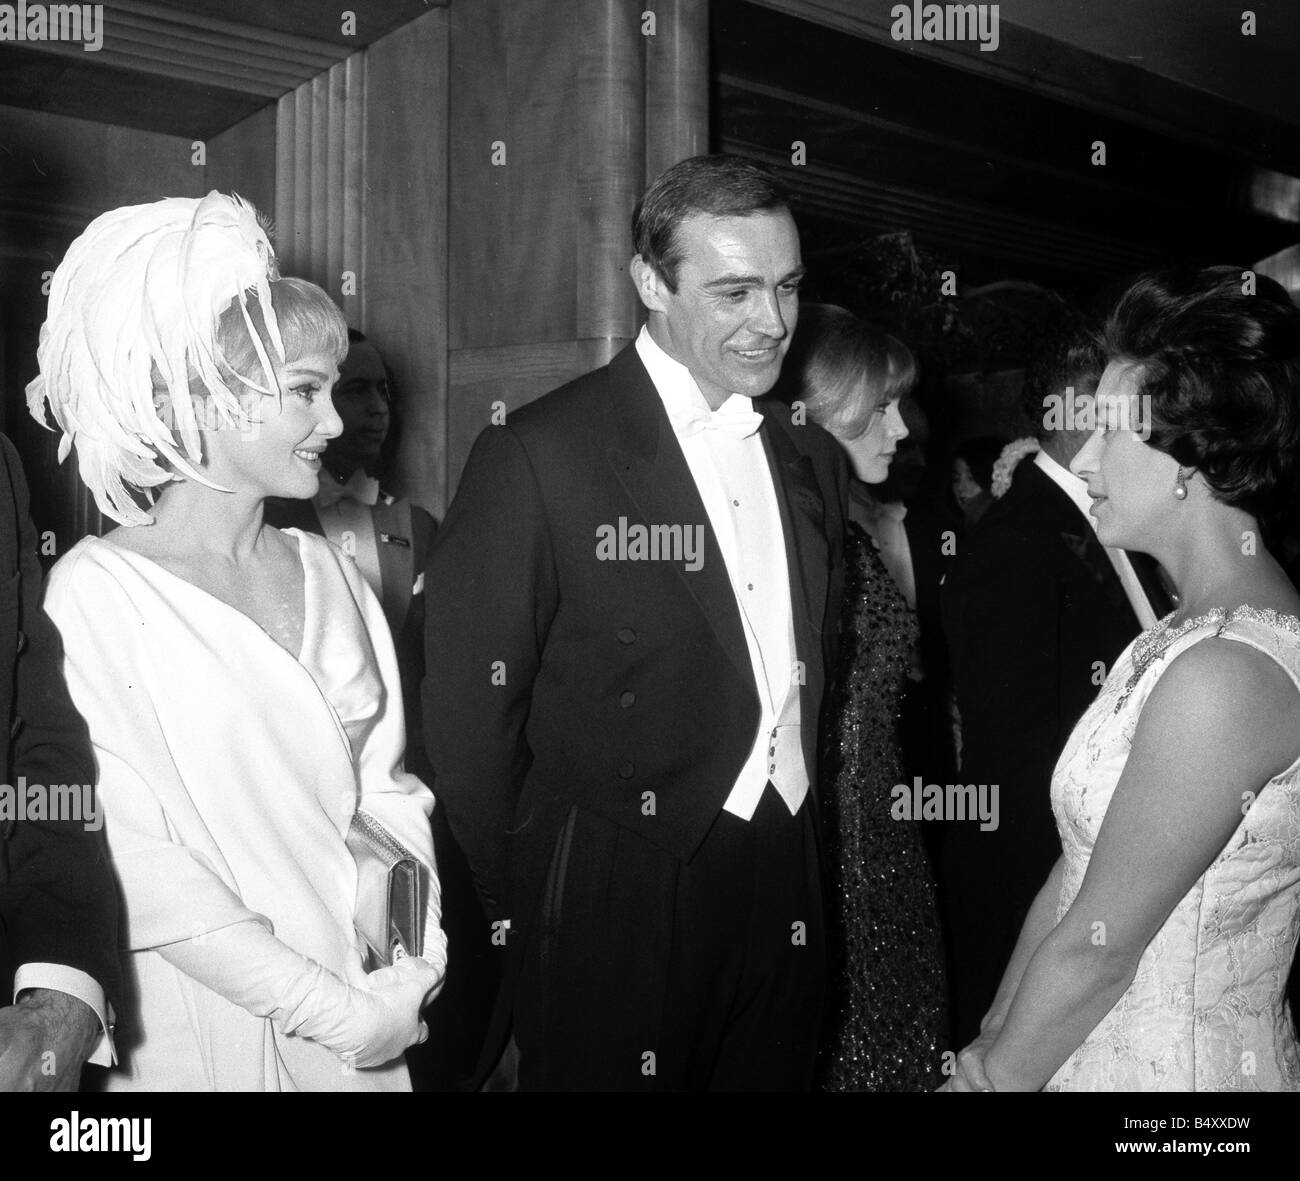 Actor Sean Connery with wife Diane Cilento meeting Princess Margaret at the London Film Premiere of Lord Jim February 1965 Stock Photo